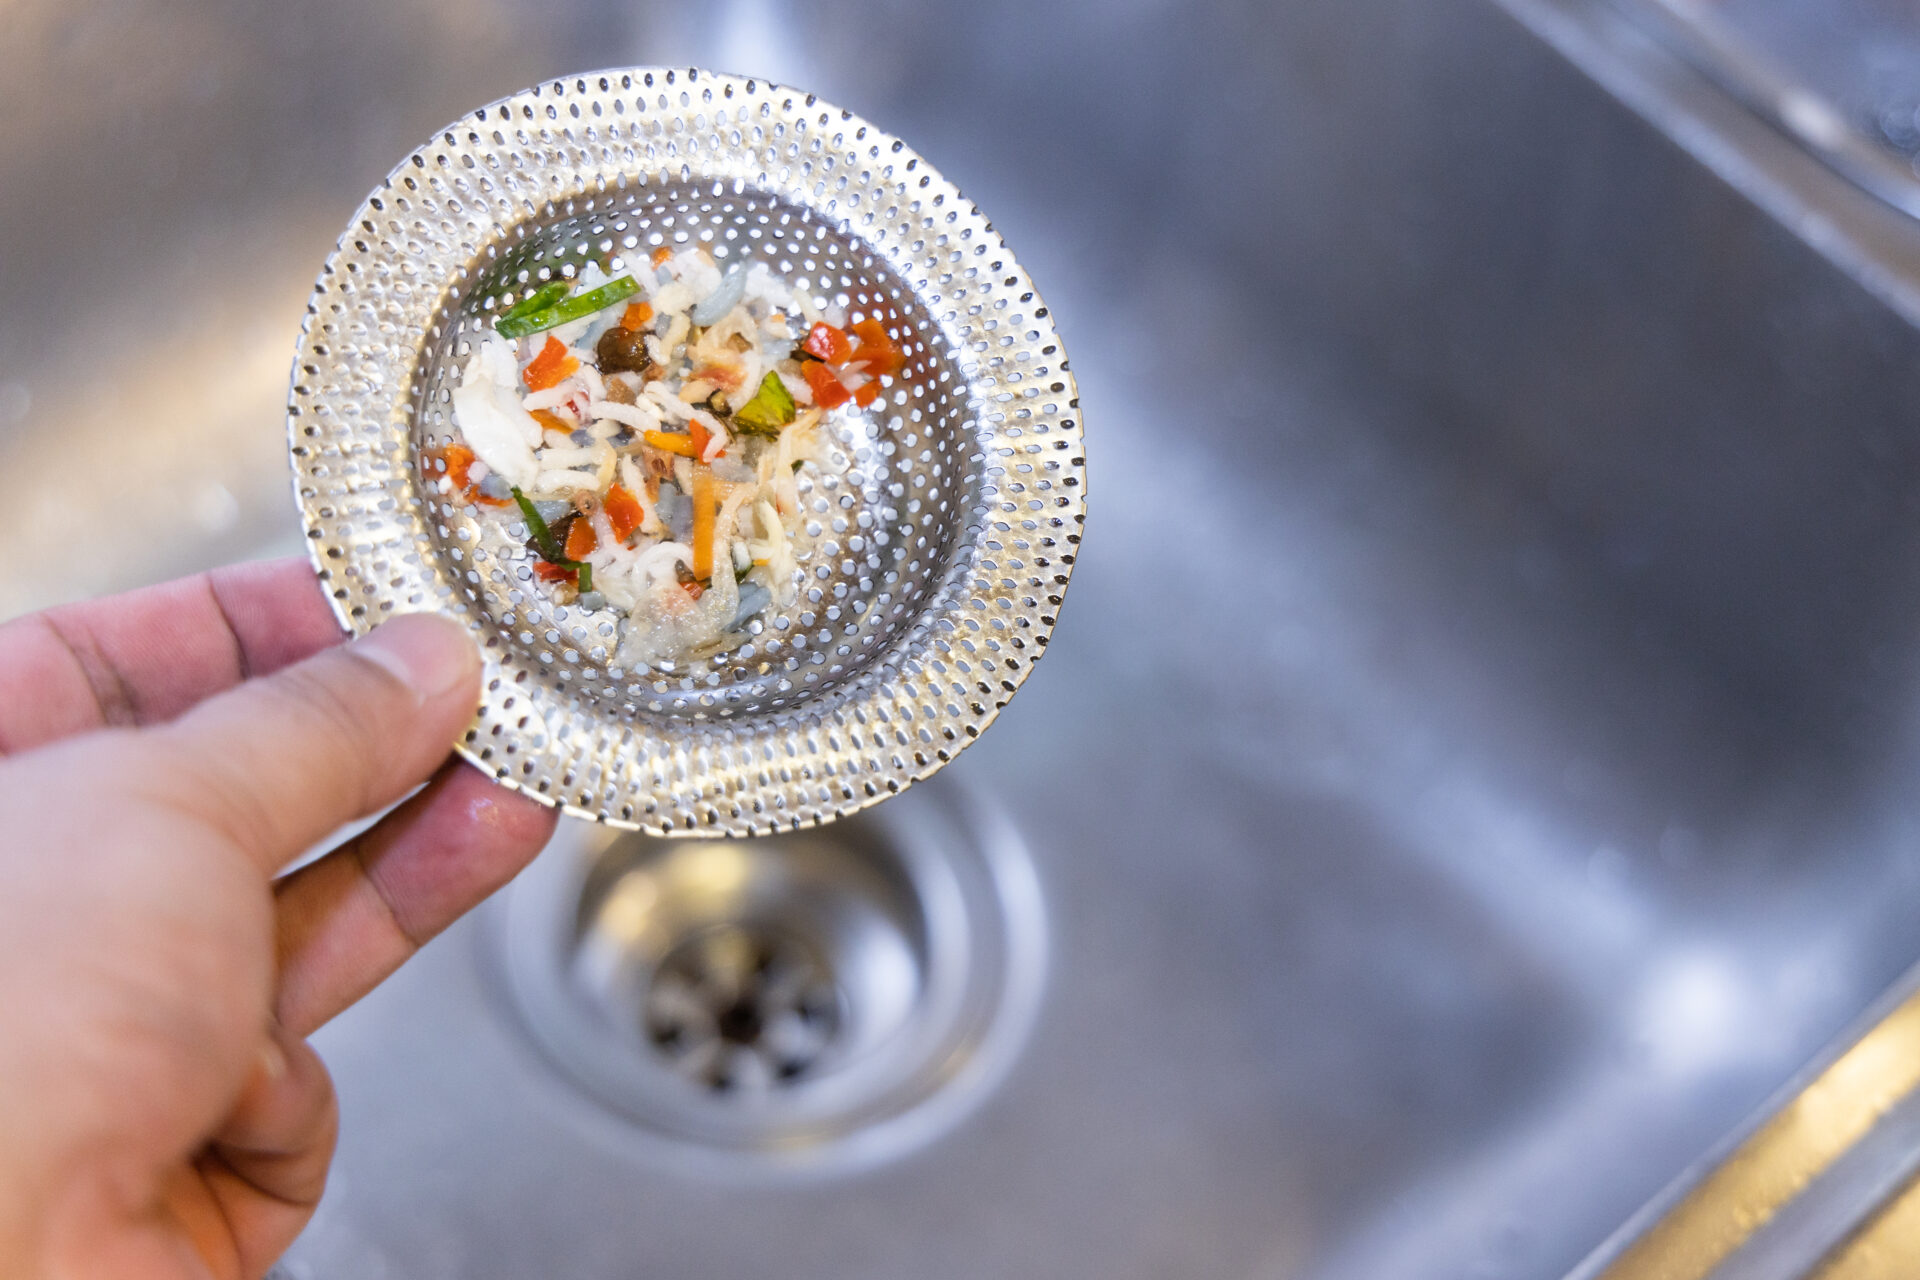 Hand holding kitchen sink waste filter with trapped food waste, against sink background